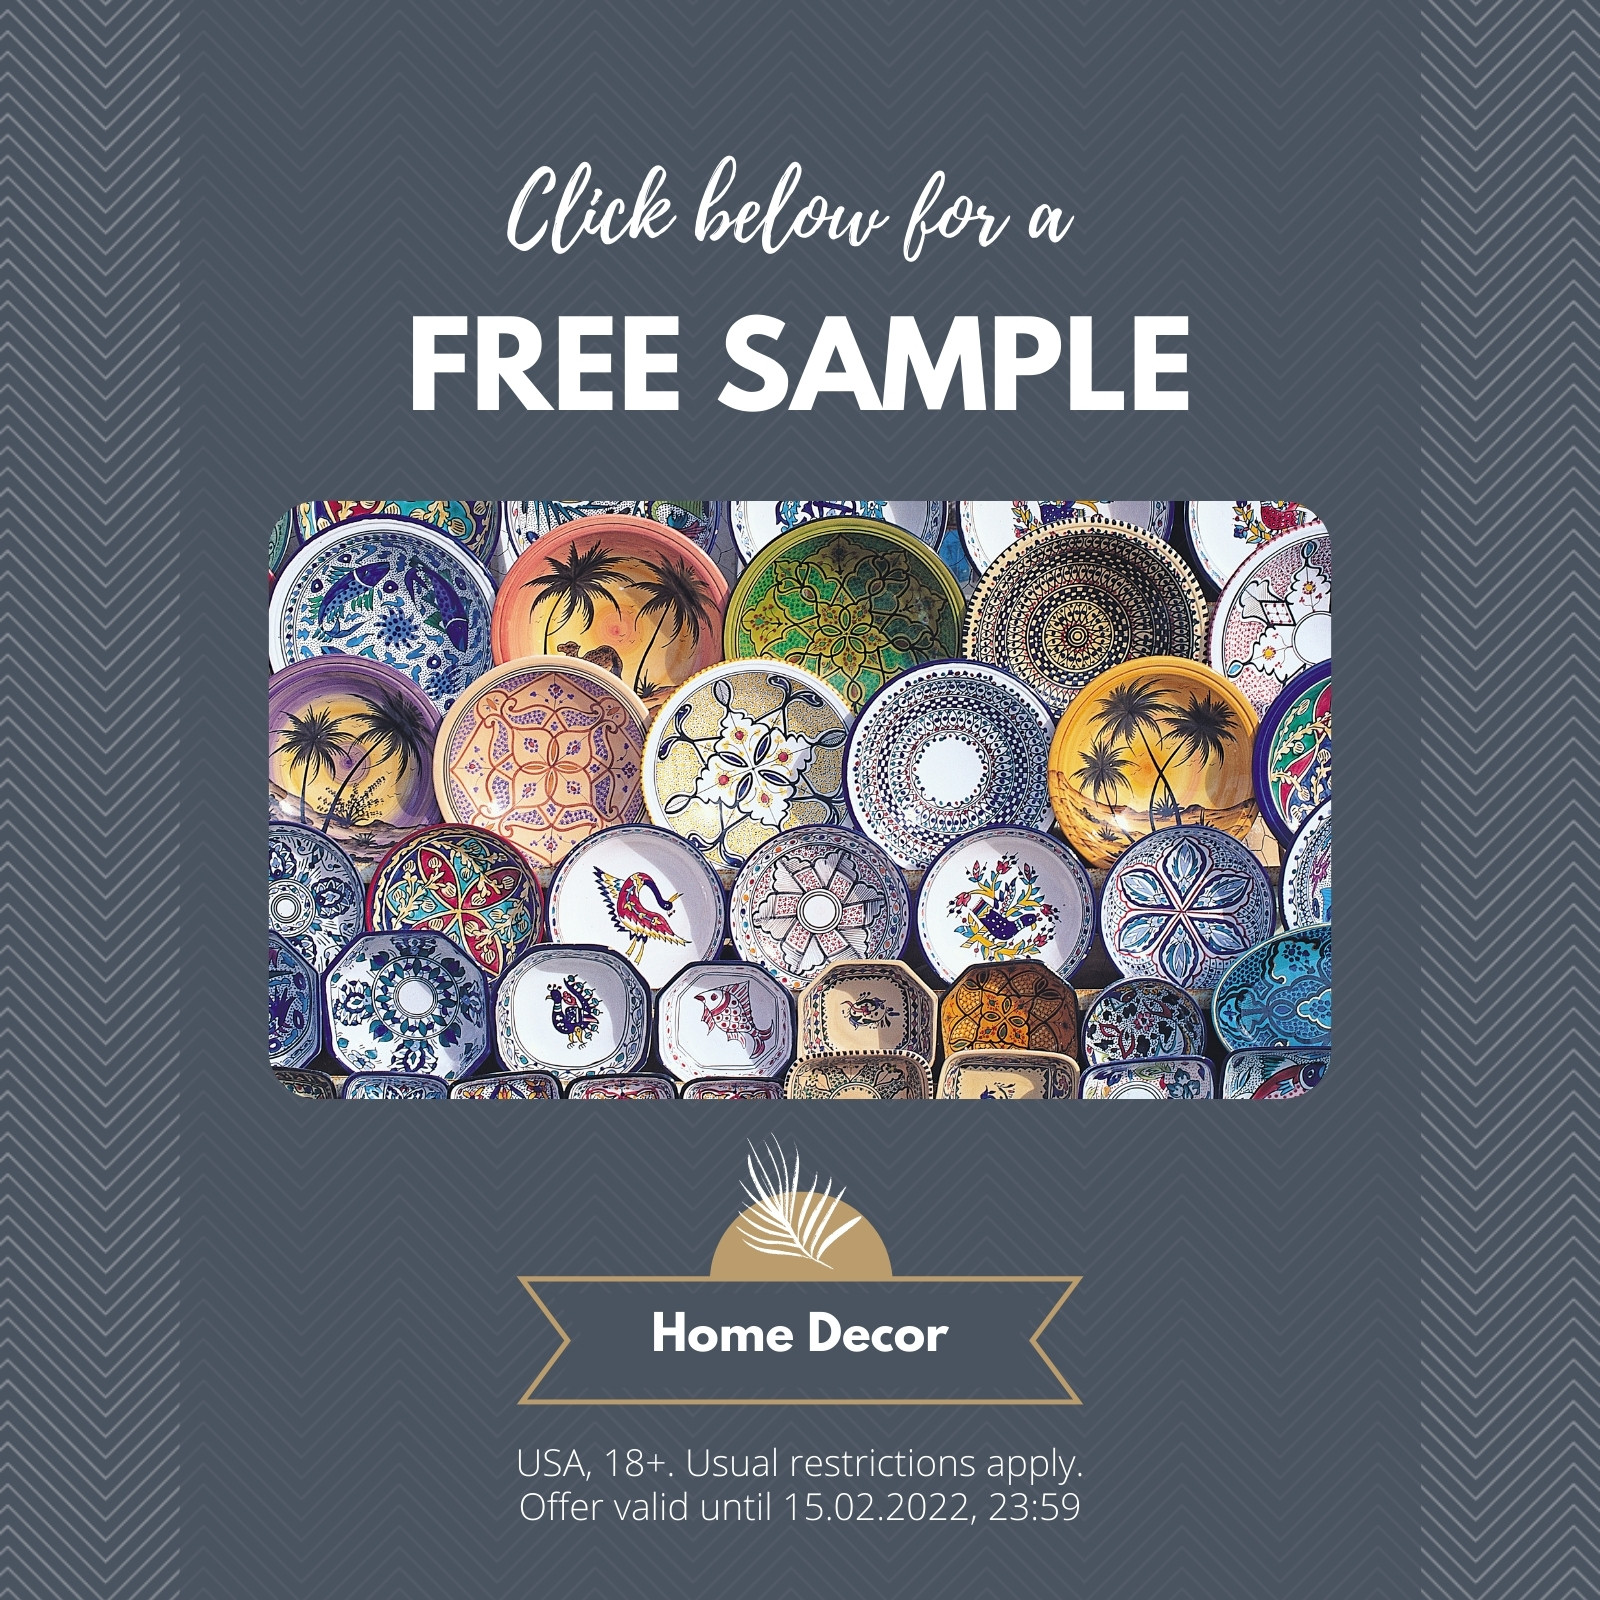 Free home decor sample offers